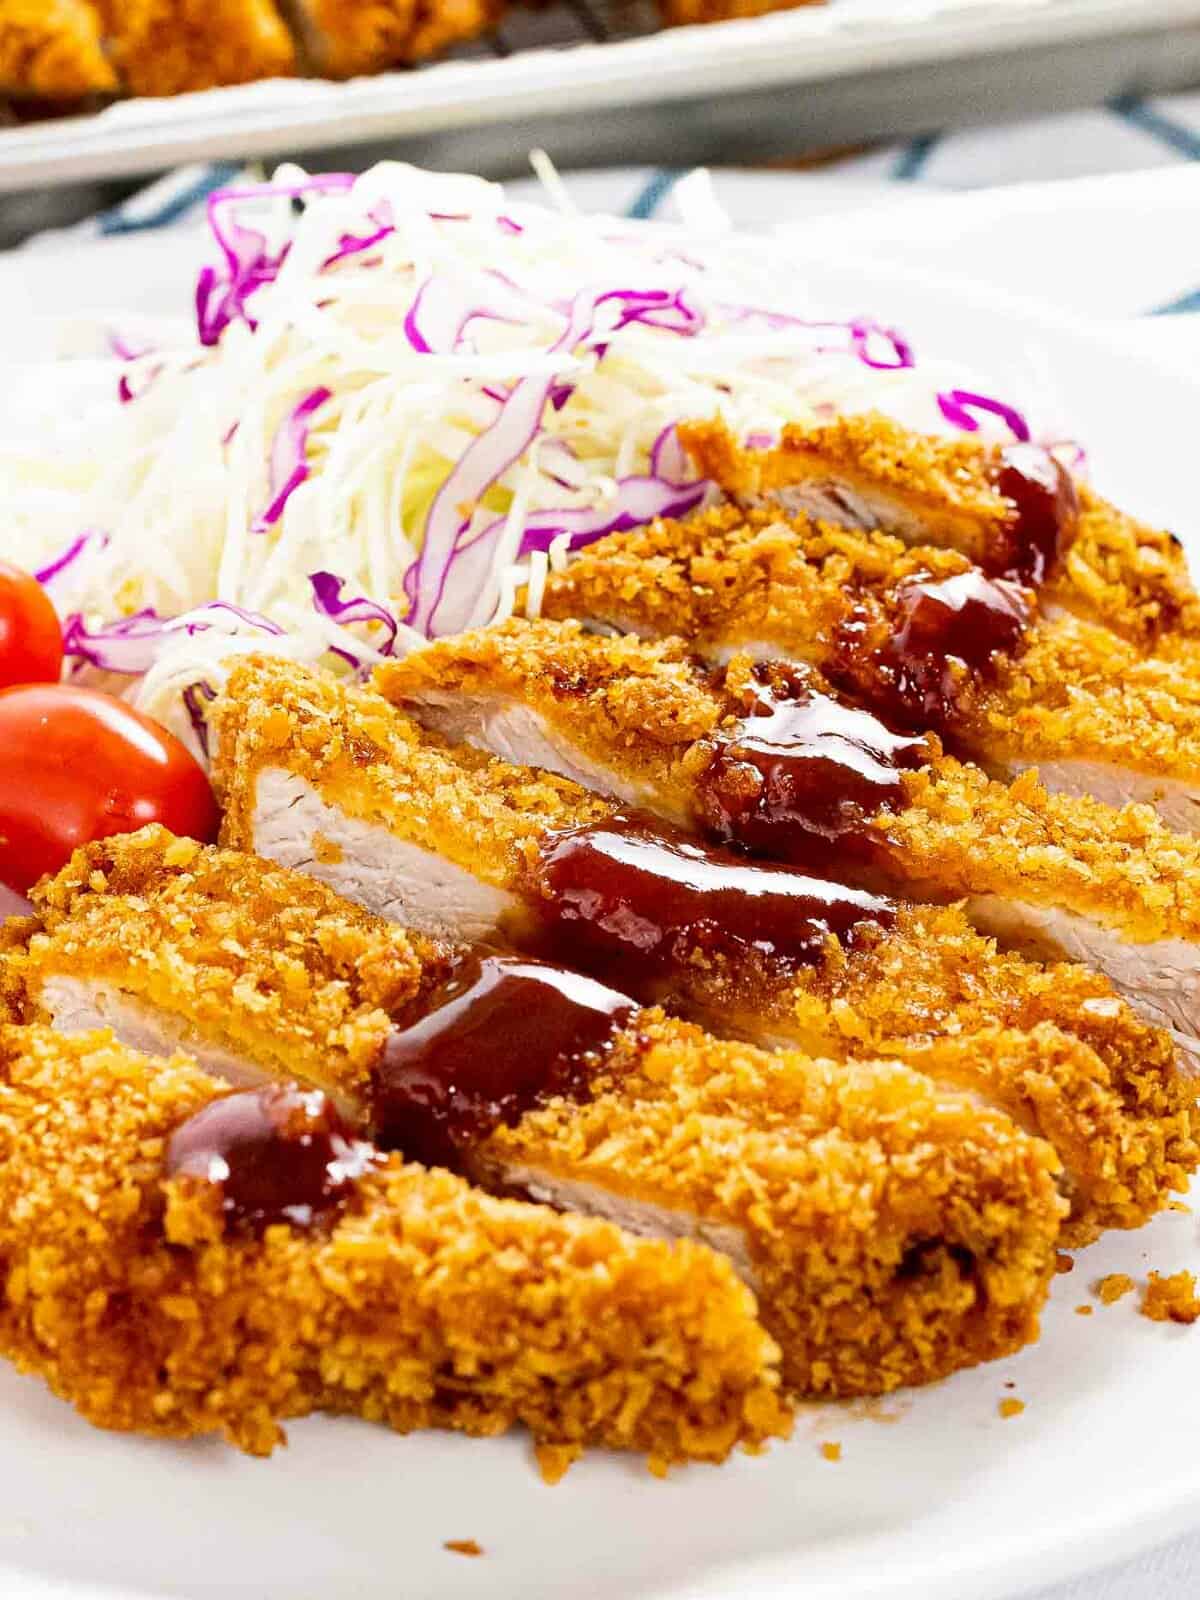 The crispiest tonkatsu with a thick layer of crispy panko breadcrumbs fried until golden brown.